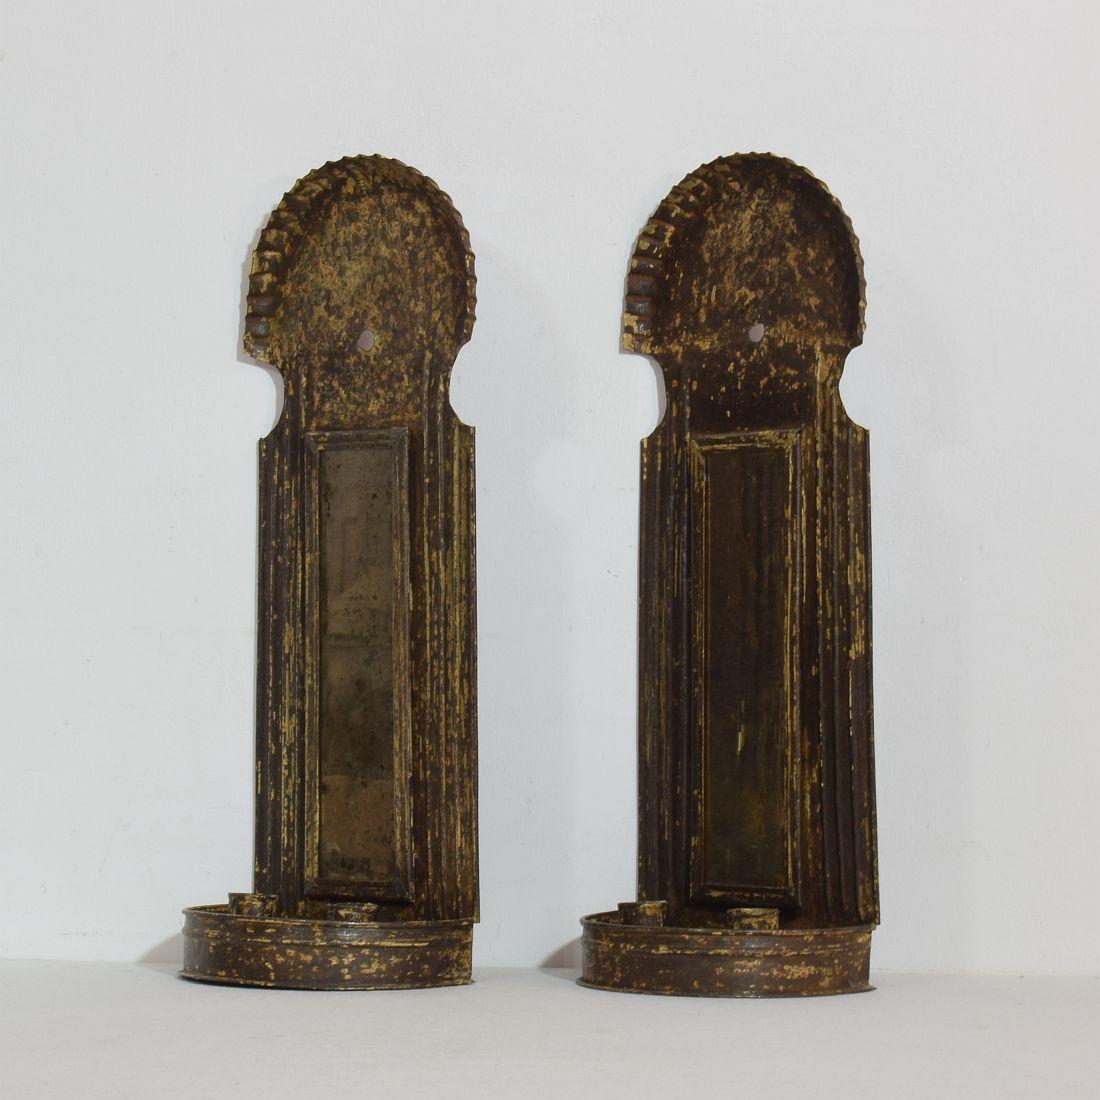 Primitive Pair of French, Late 18th Century Iron Wall Candleholders with Mirrors